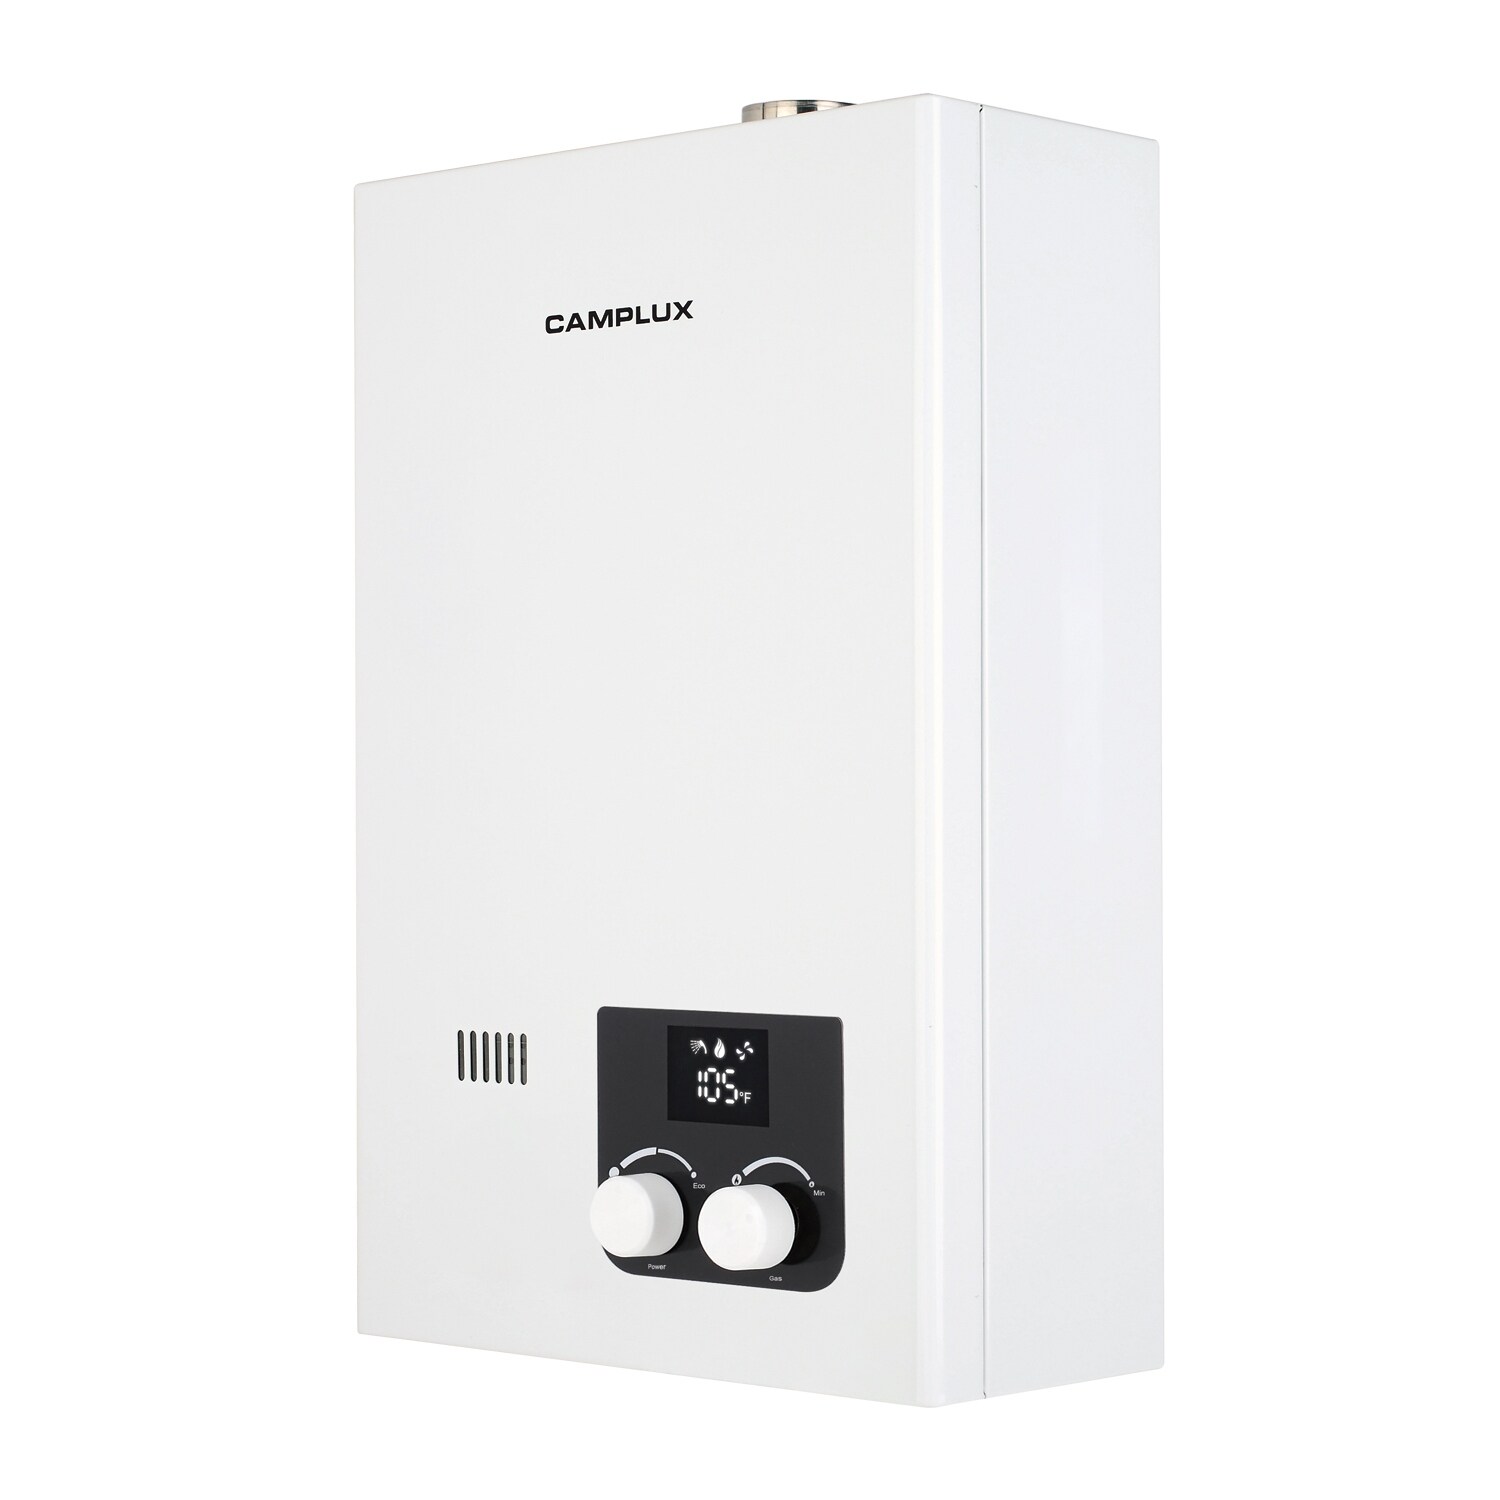 Camplux 10L 2.64 GPM High Capacity Indoor Propane Tankless Water Heater